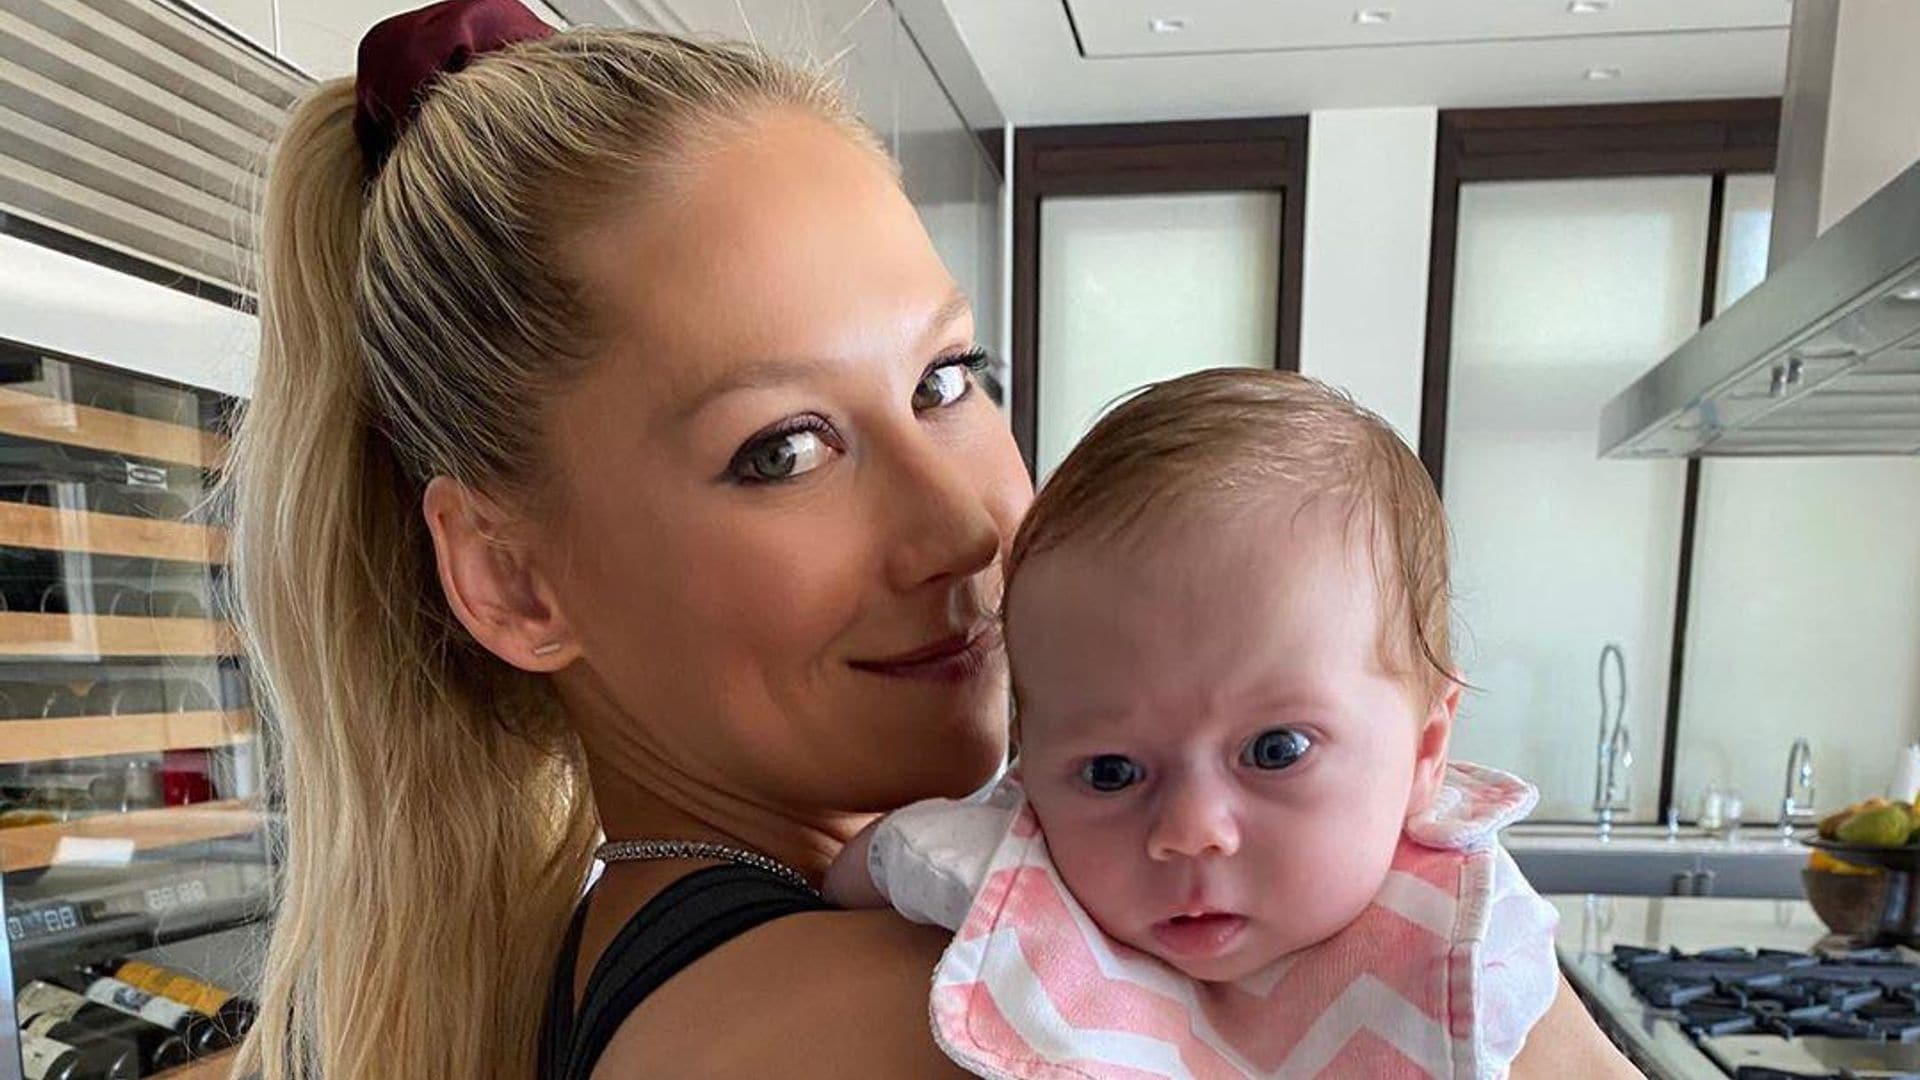 Anna Kournikova shows off baby daughter – but does Mary look more like Enrique Iglesias?